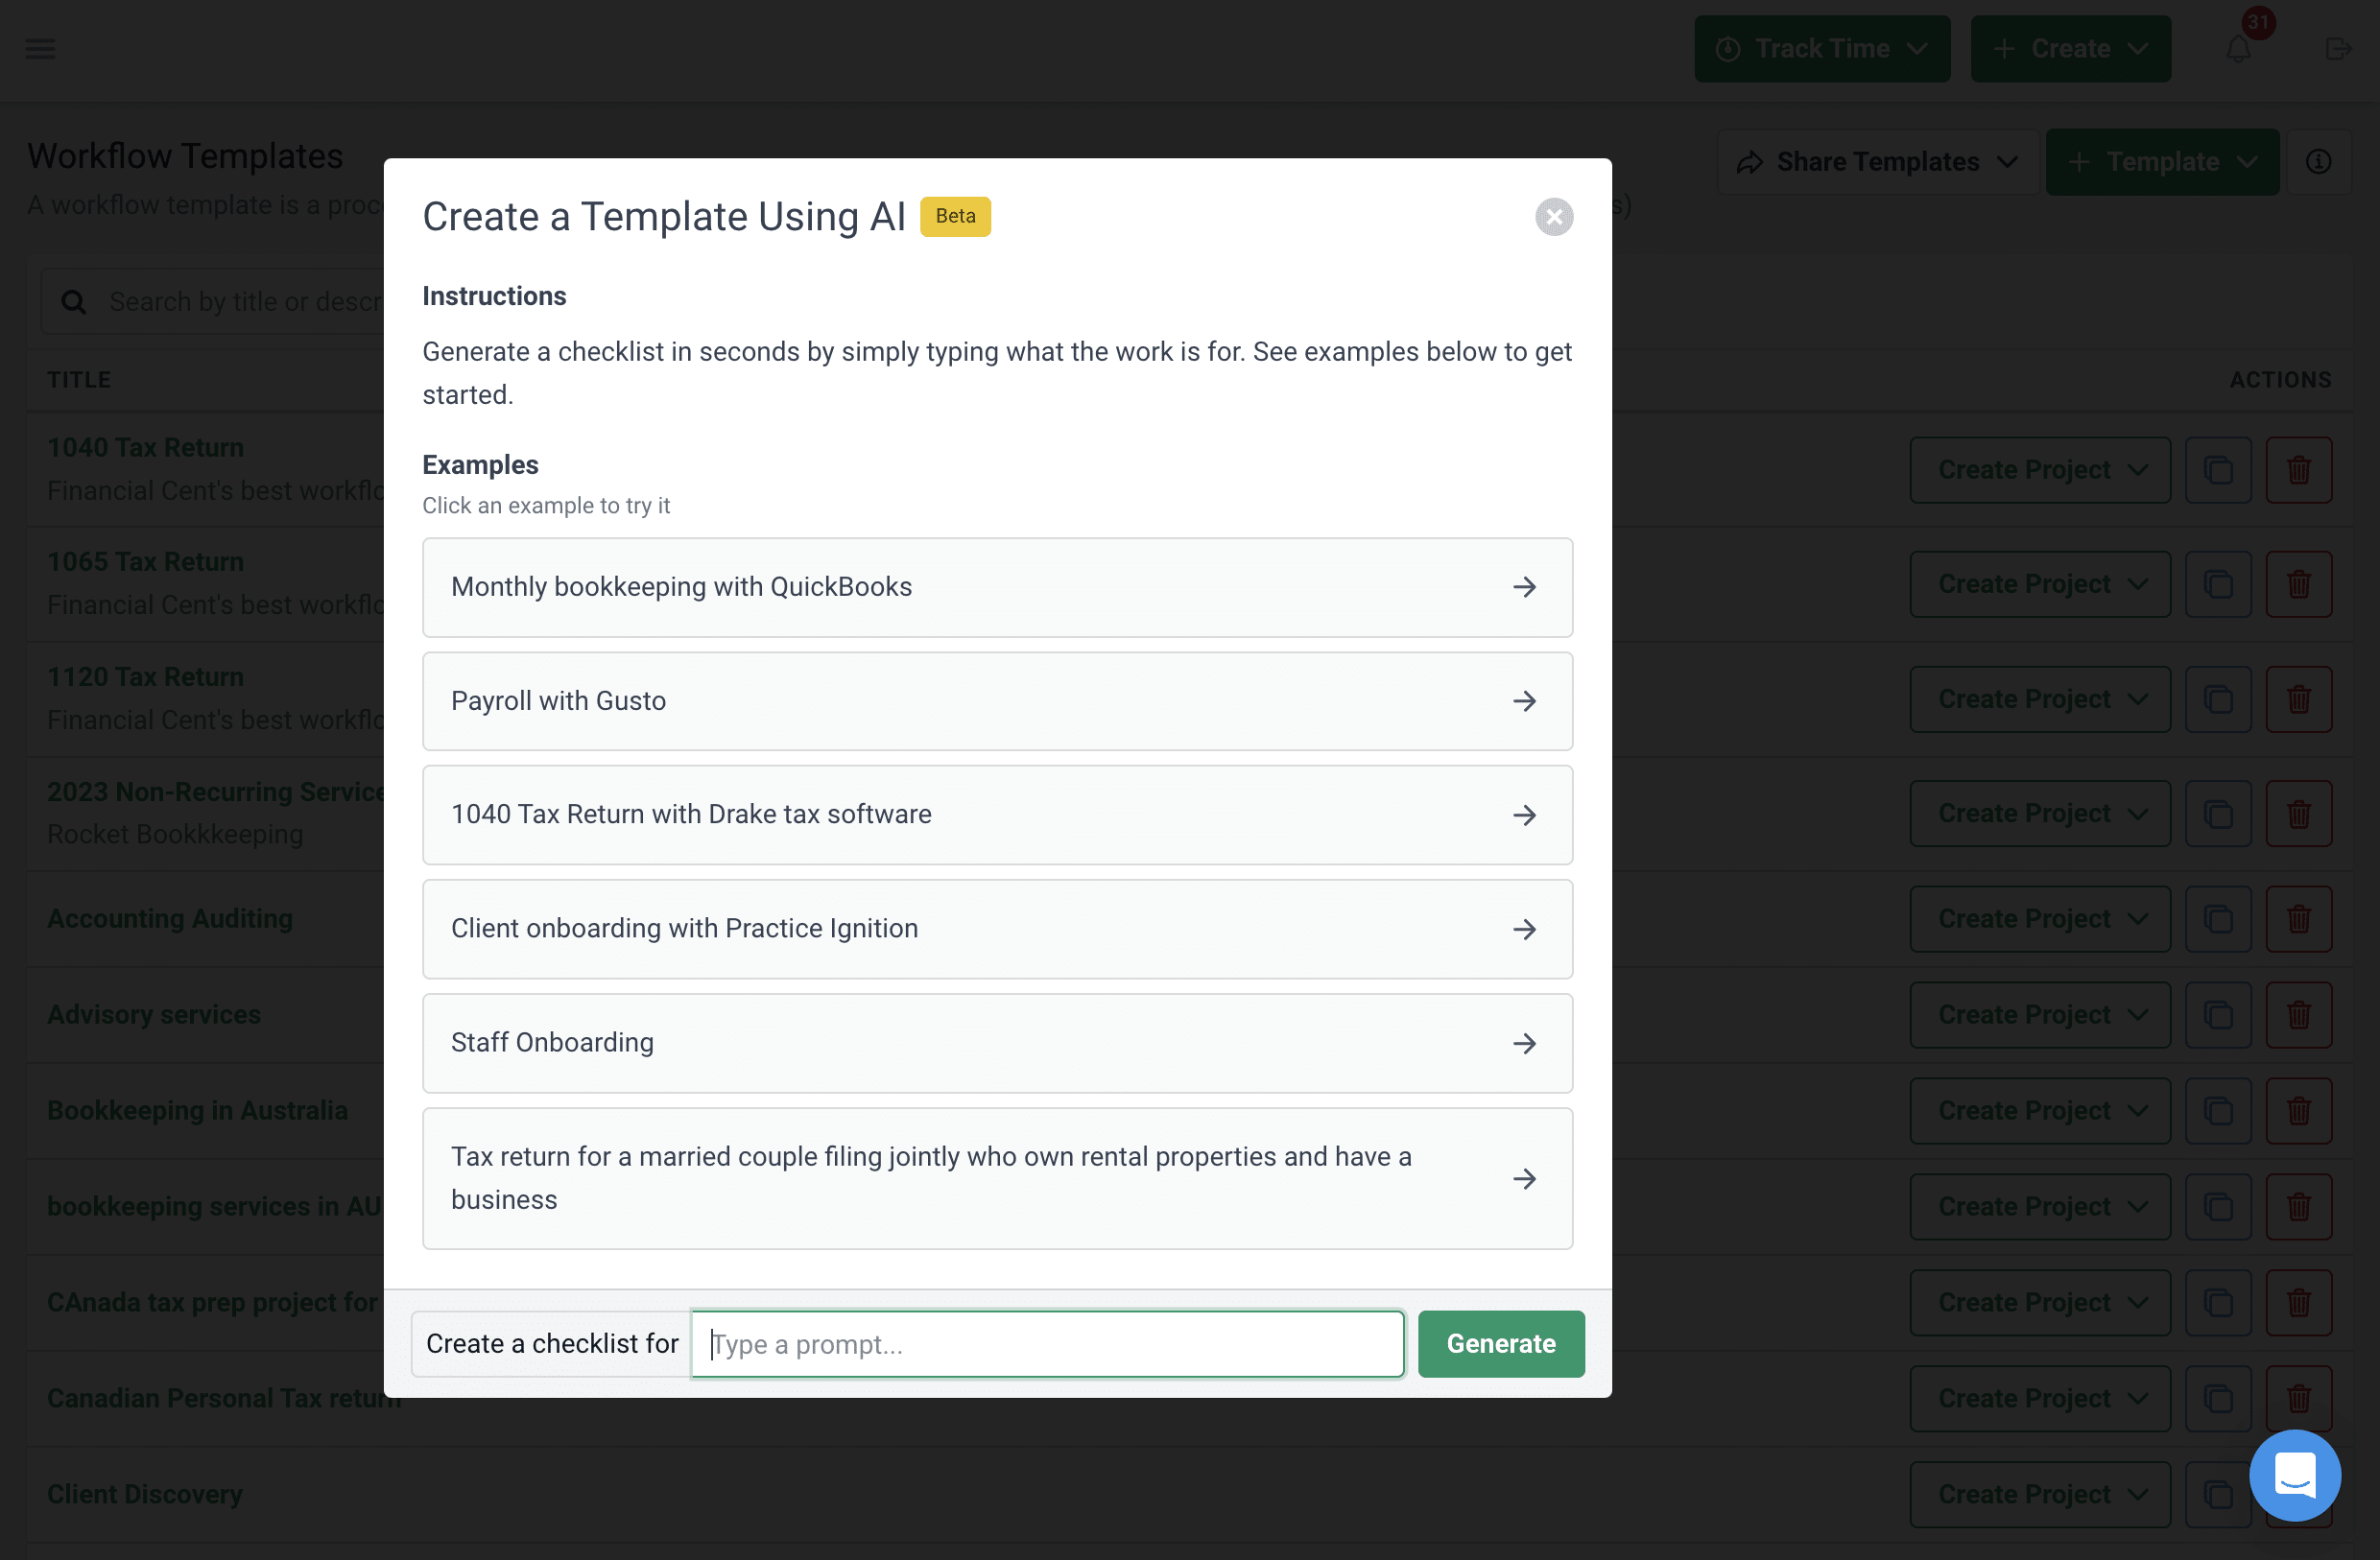 screenshot of using AI to create workflow templates in seconds in Financial Cents